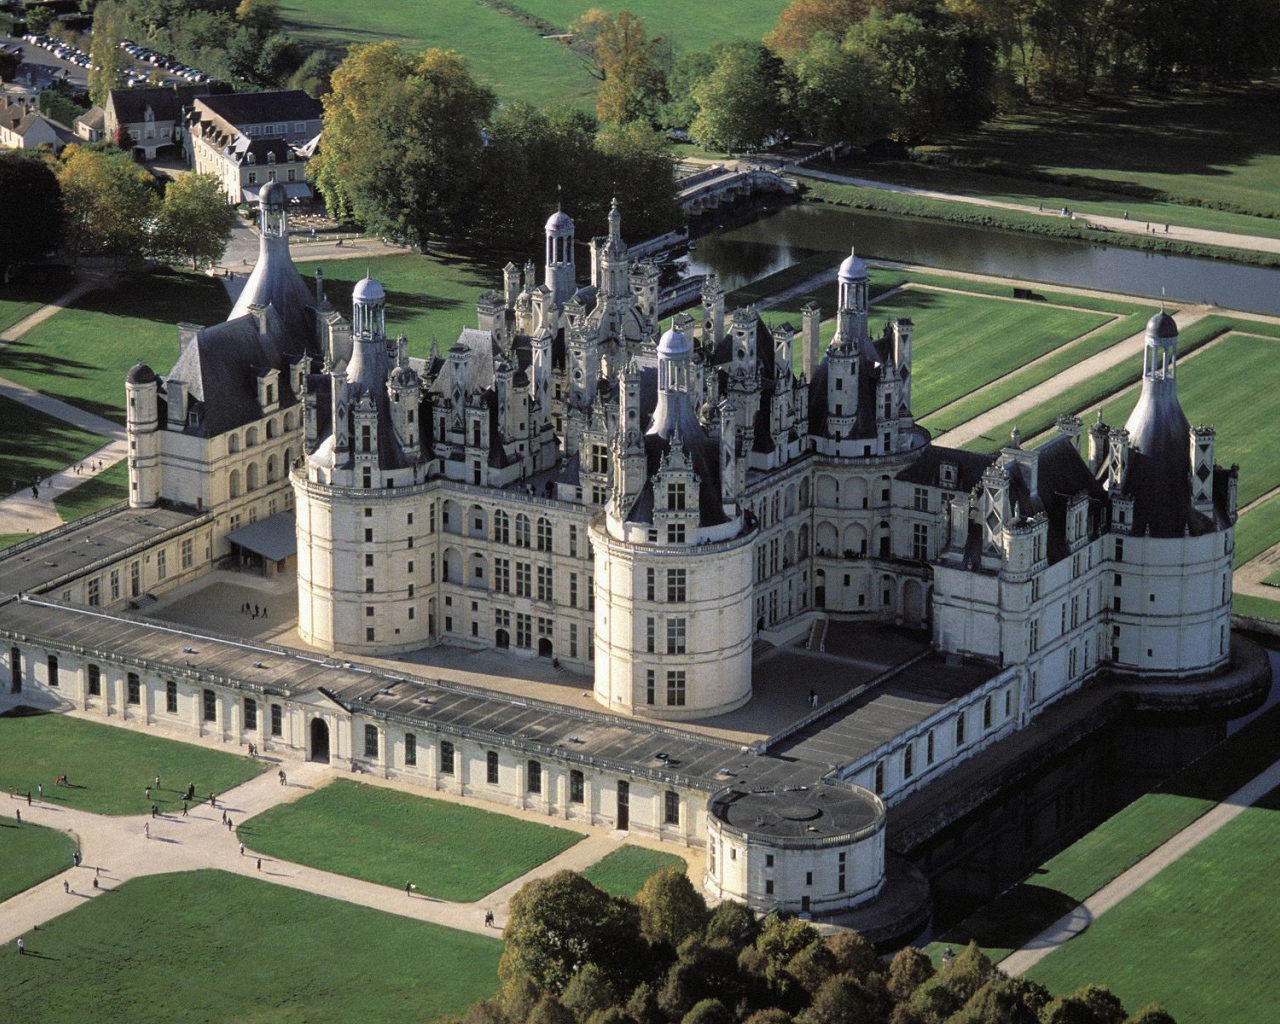 Virtual tour of the castle in the Loire, France